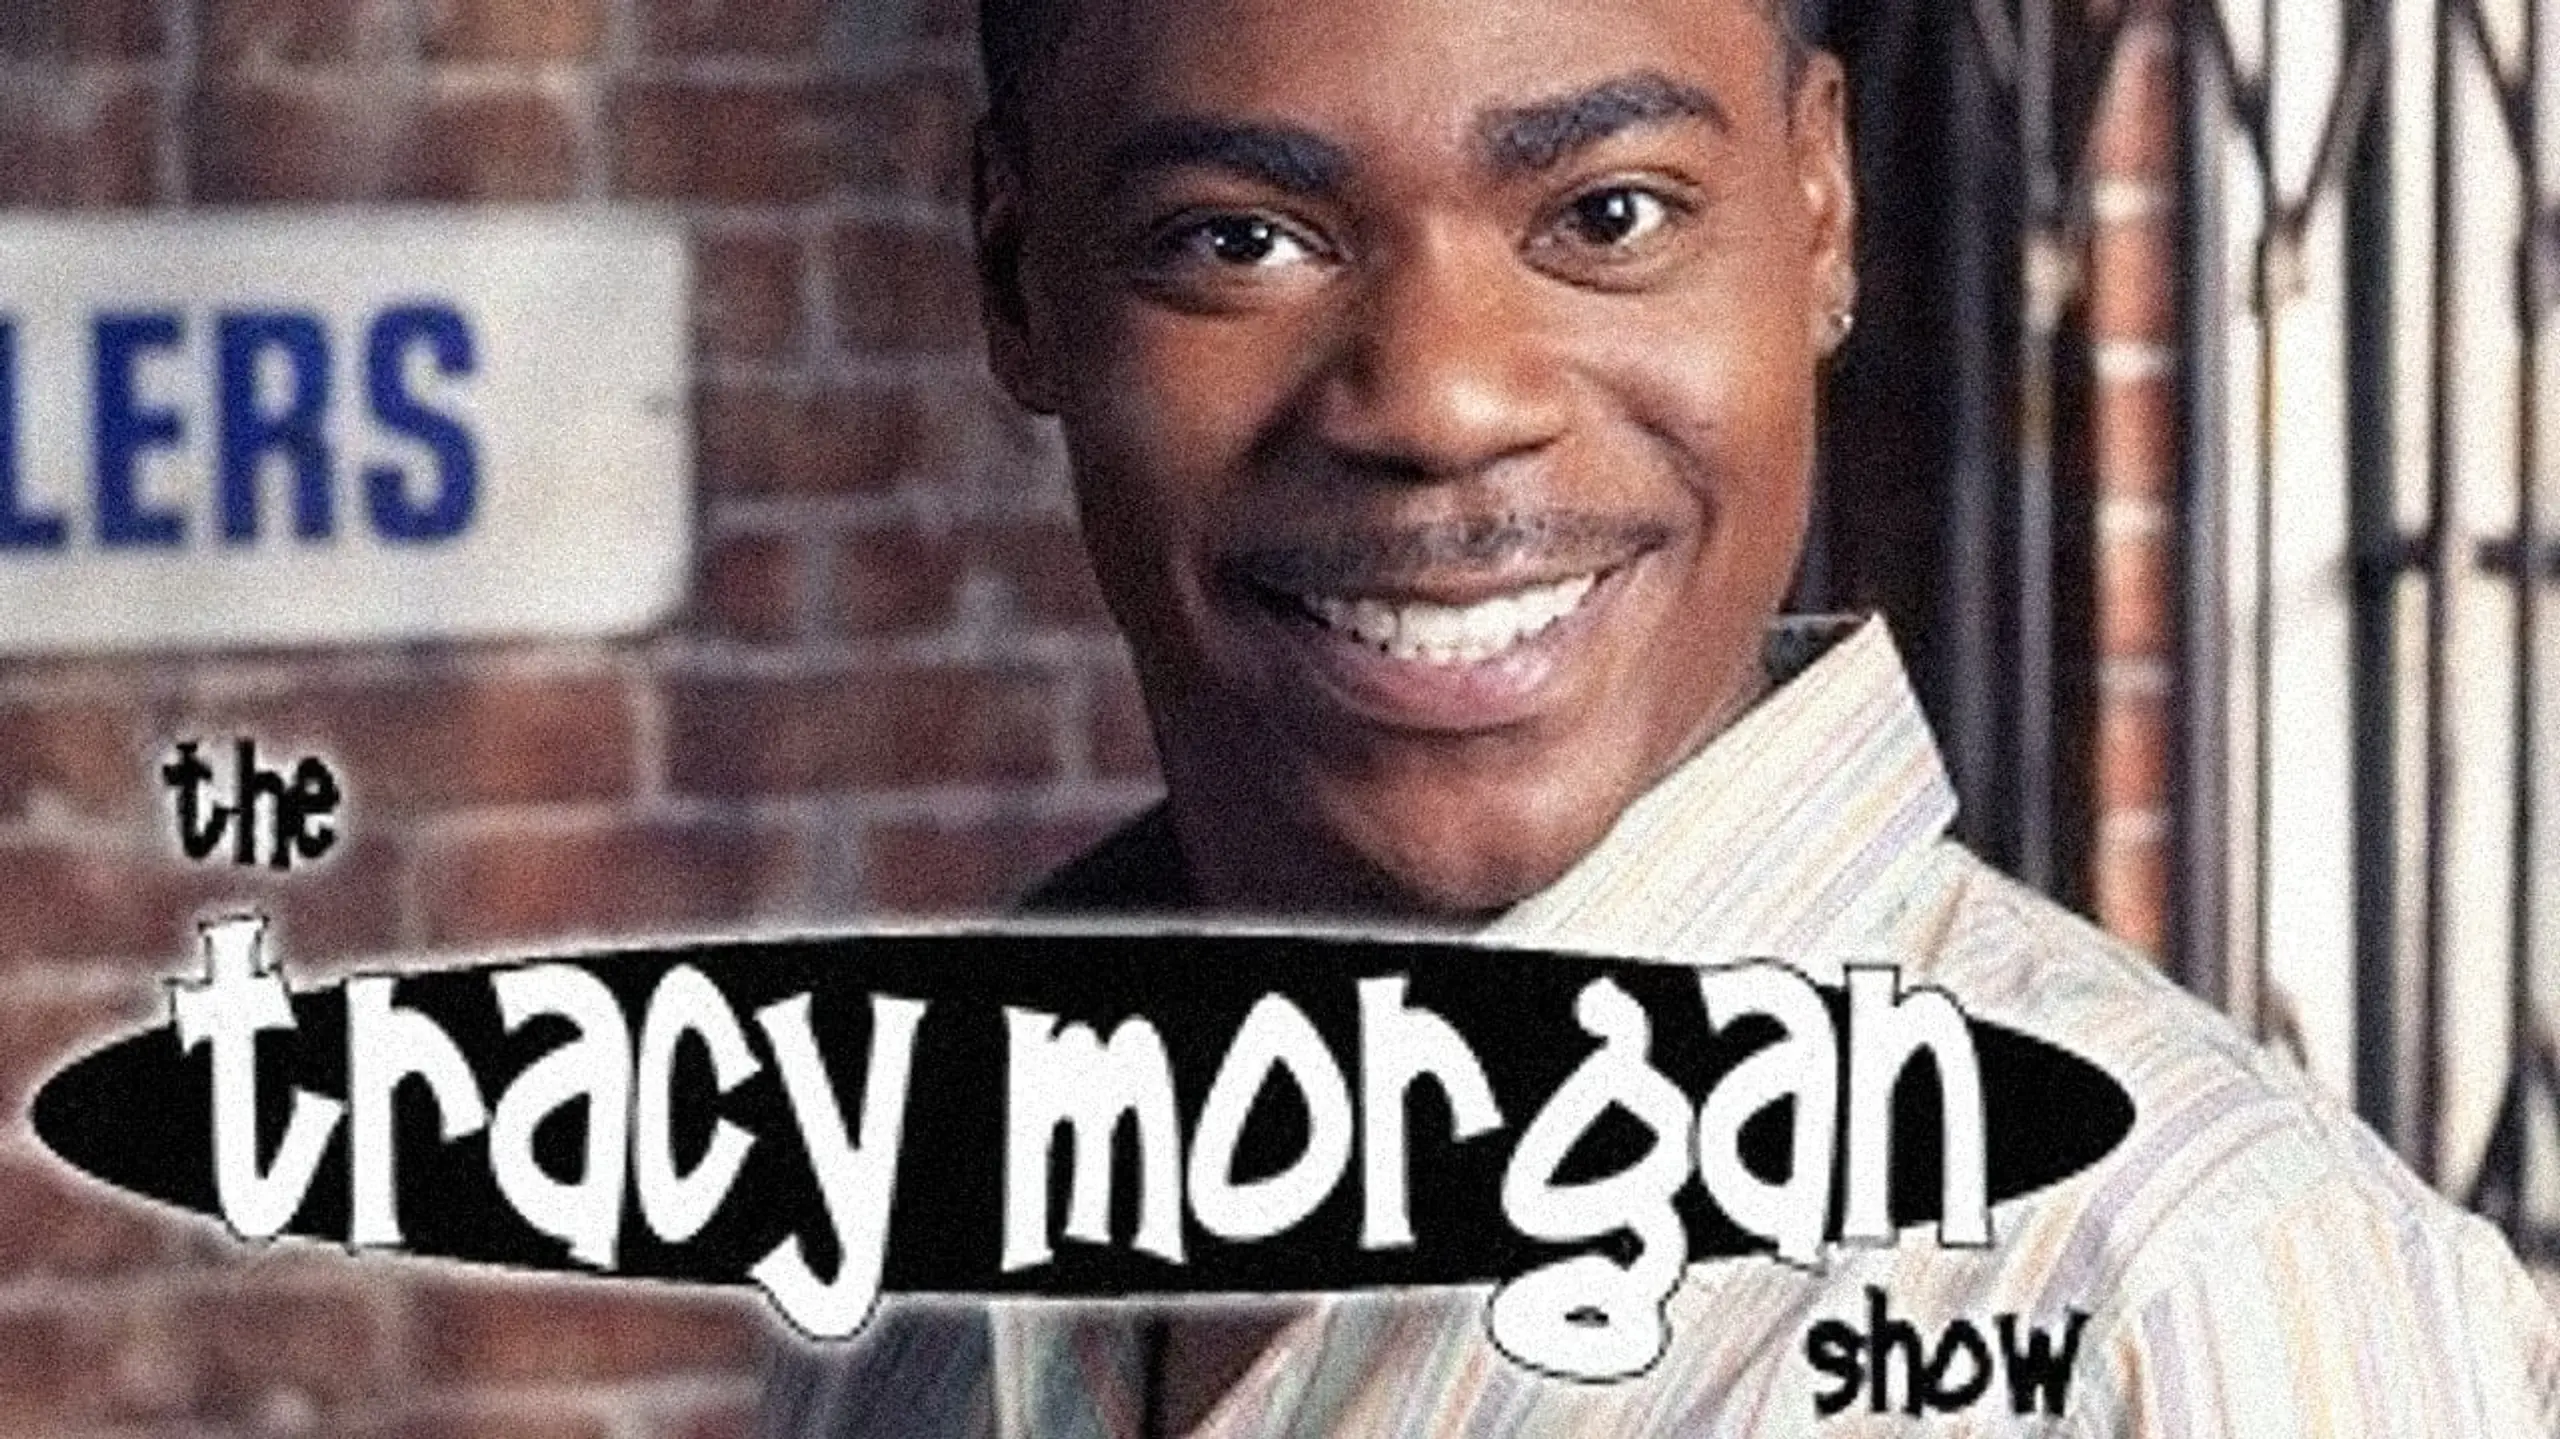 The Tracy Morgan Show